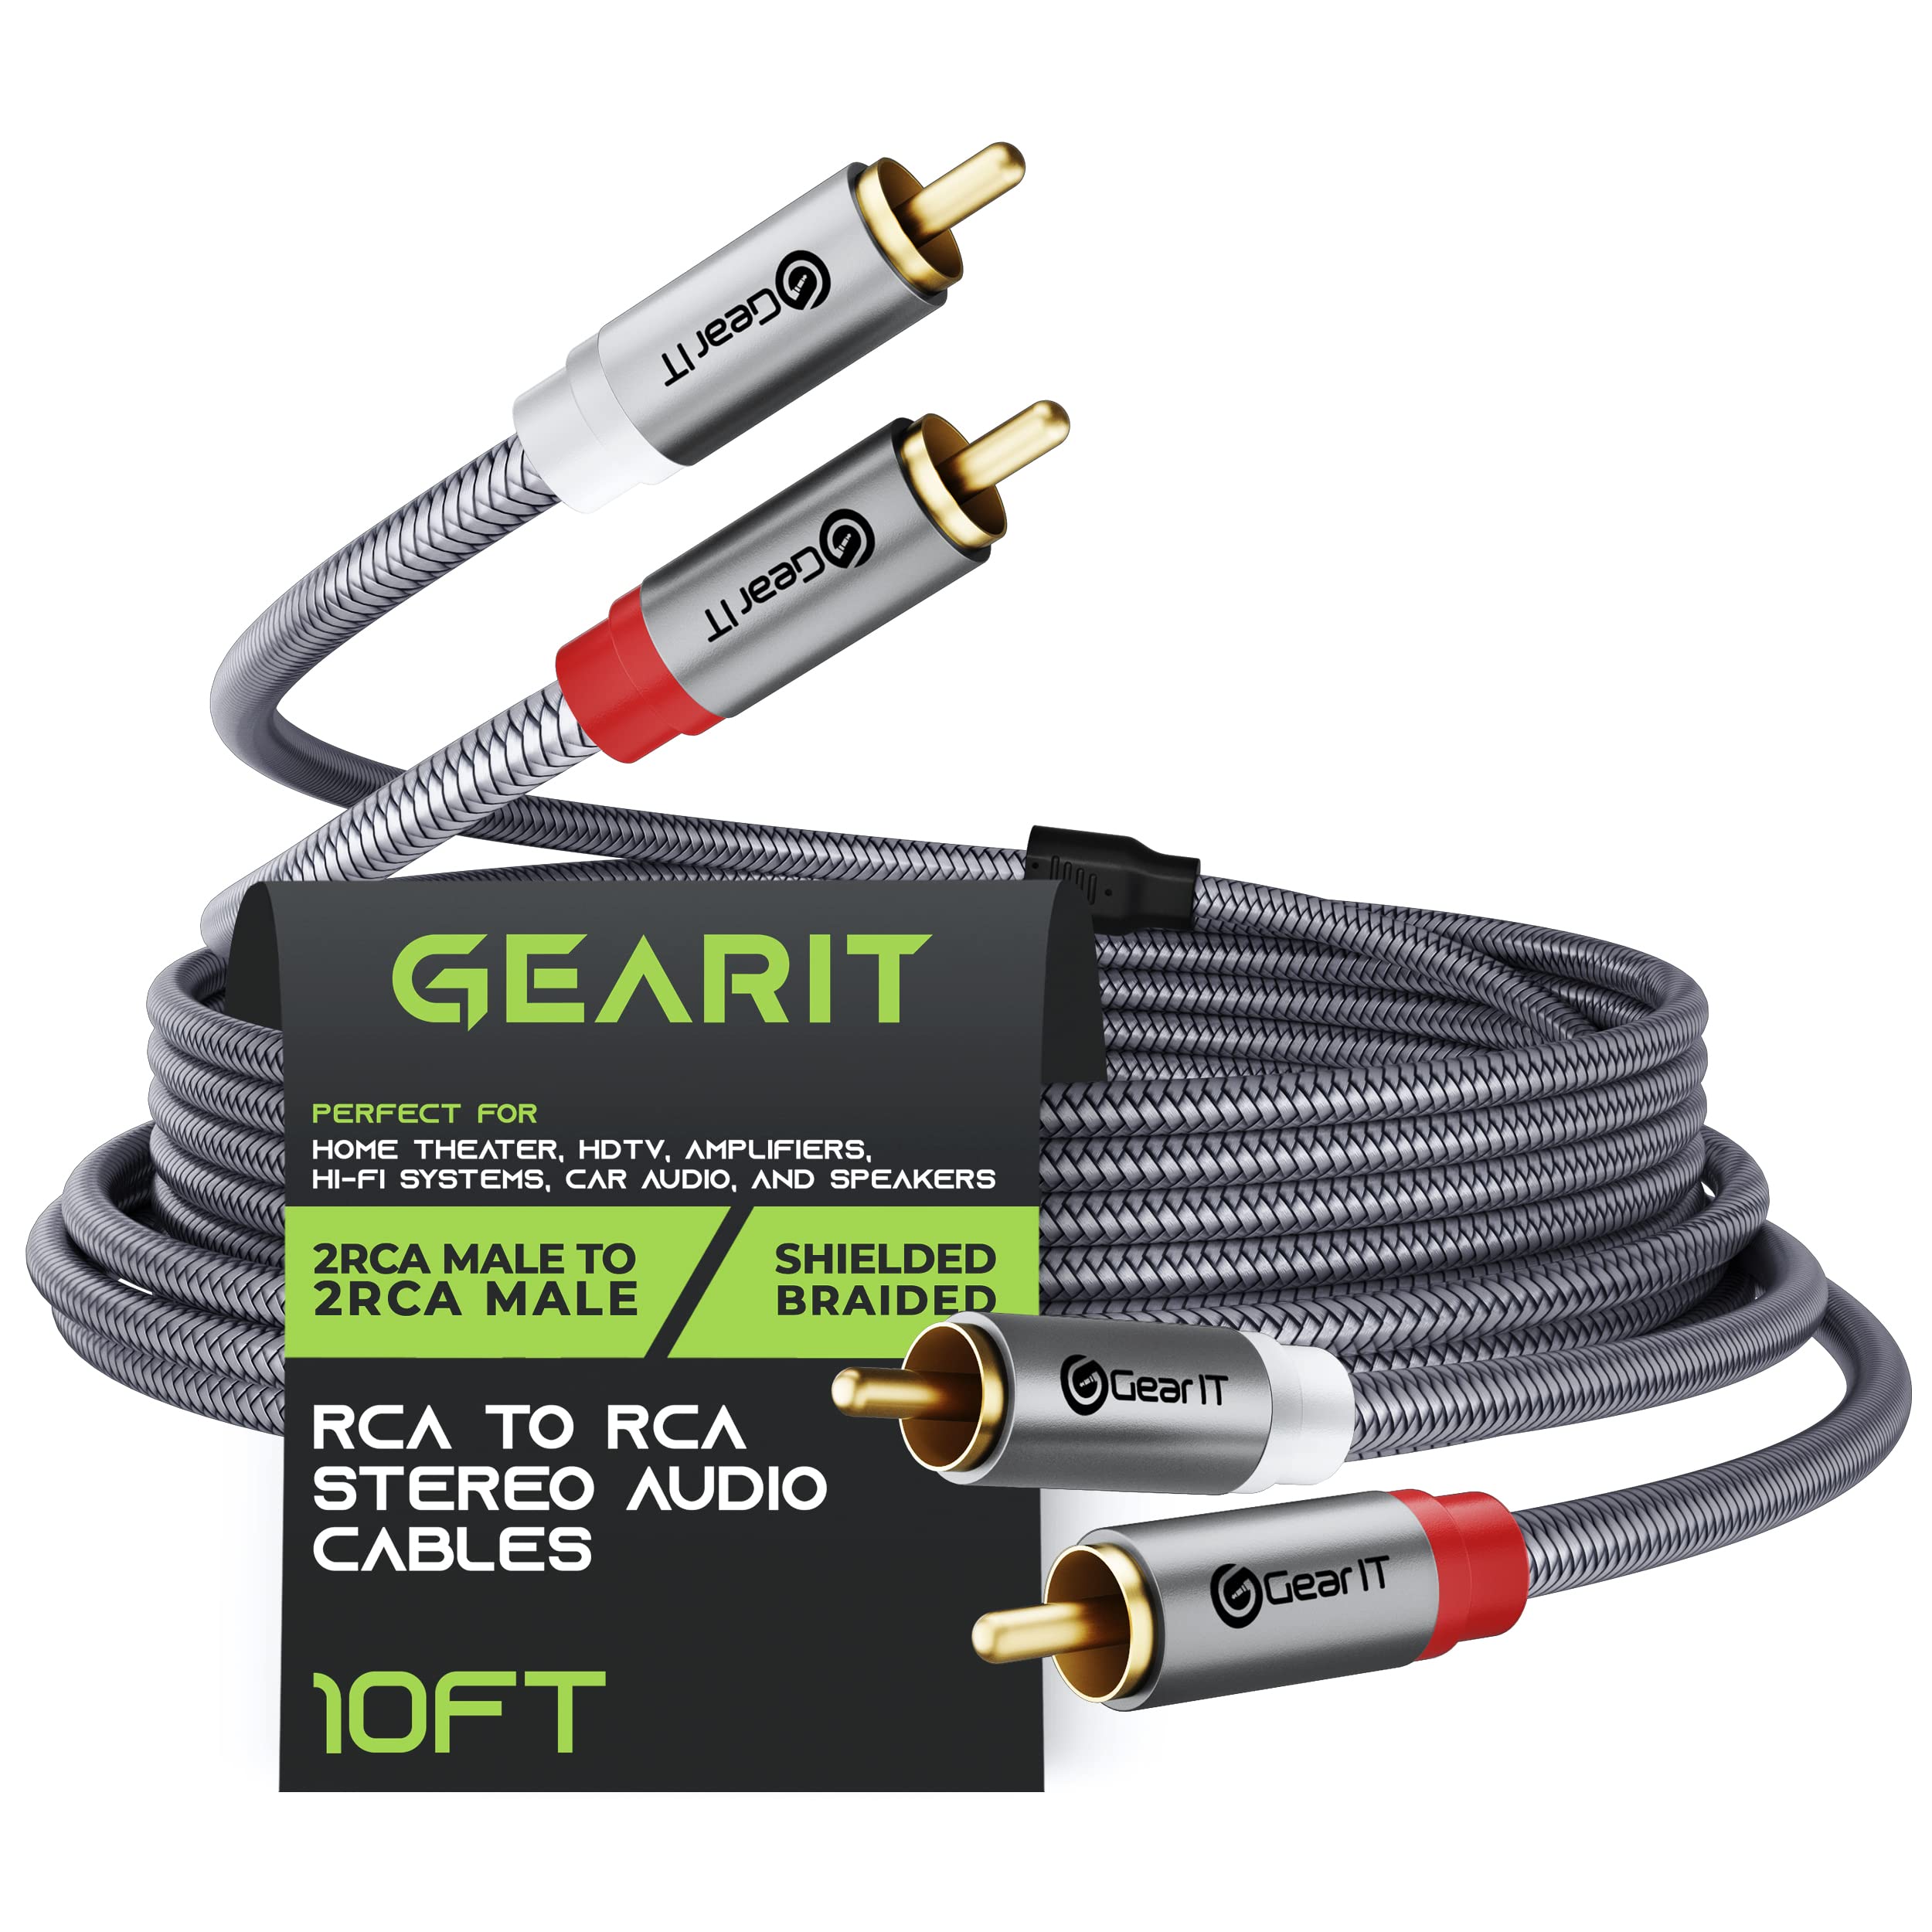 GearIT RCA Cable (10FT) 2RCA Male to 2RCA Male Stereo Audio Cables Shielded Braided RCA Stereo Cable for Home Theater, HDTV, Amplifiers, Hi-Fi Systems, Car Audio, Speakers, 10 Feet